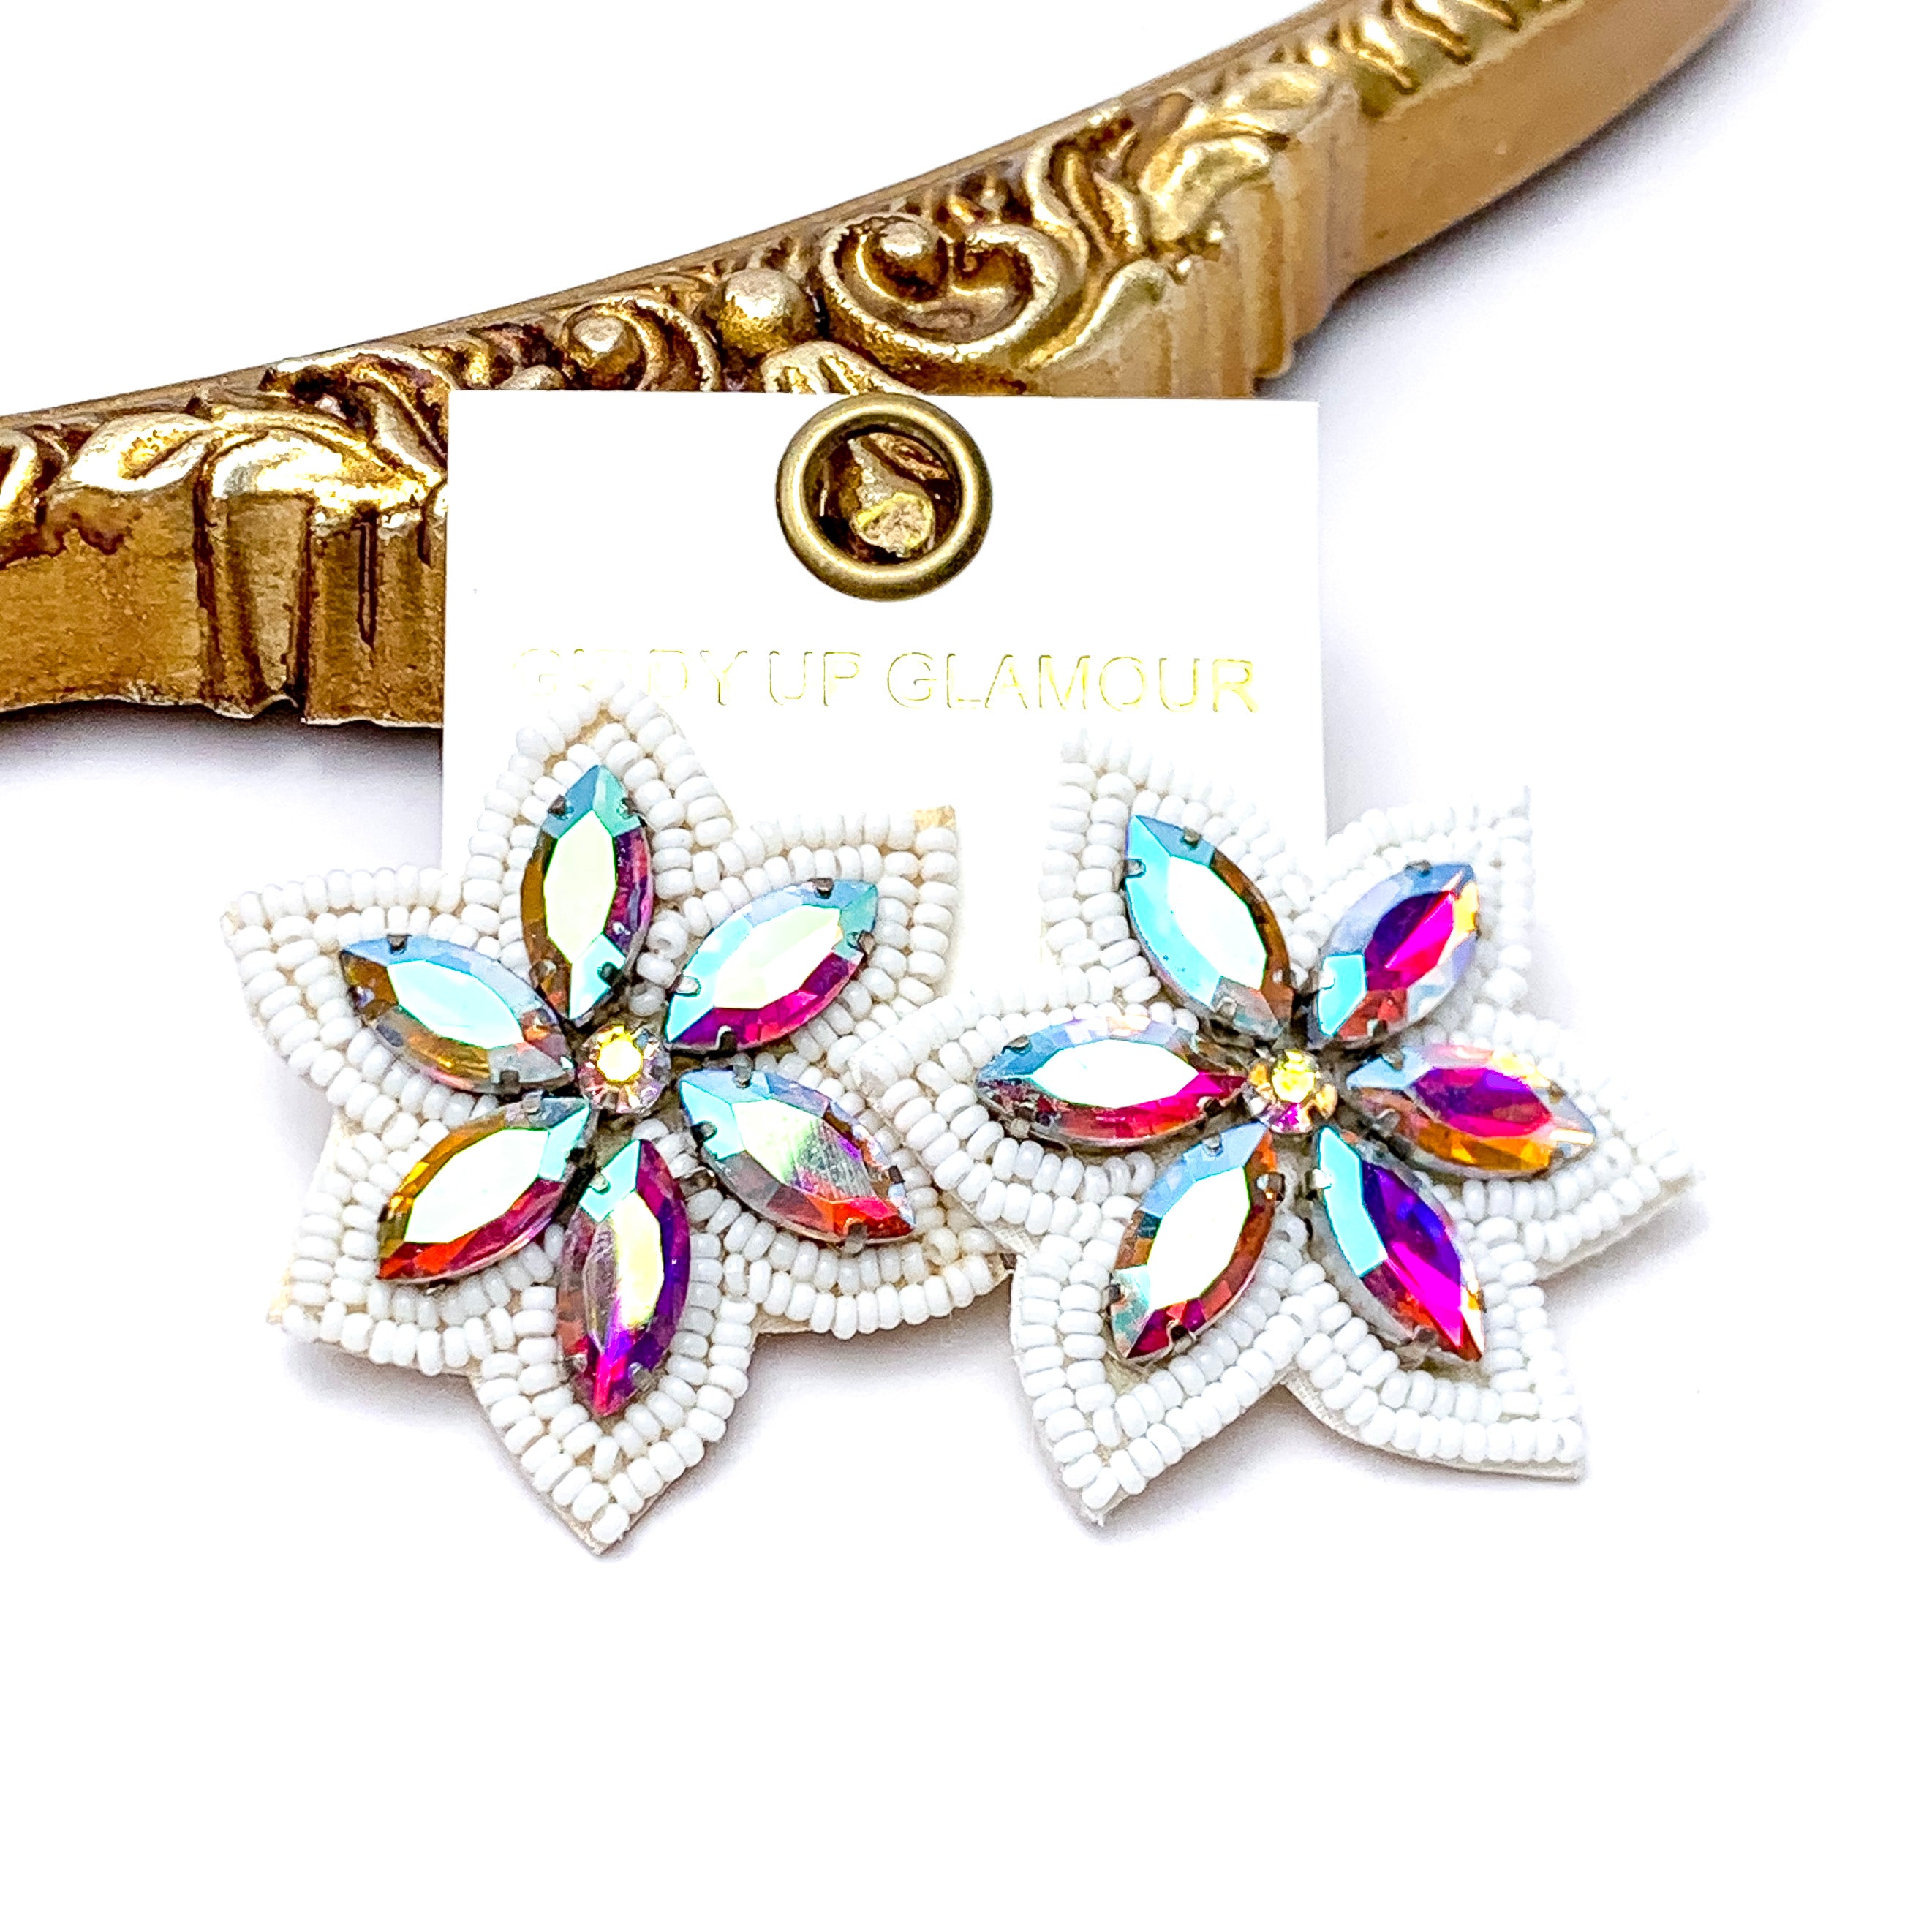 Prismatic Petals Seed Bead Flower Stud Earrings with AB stones in White